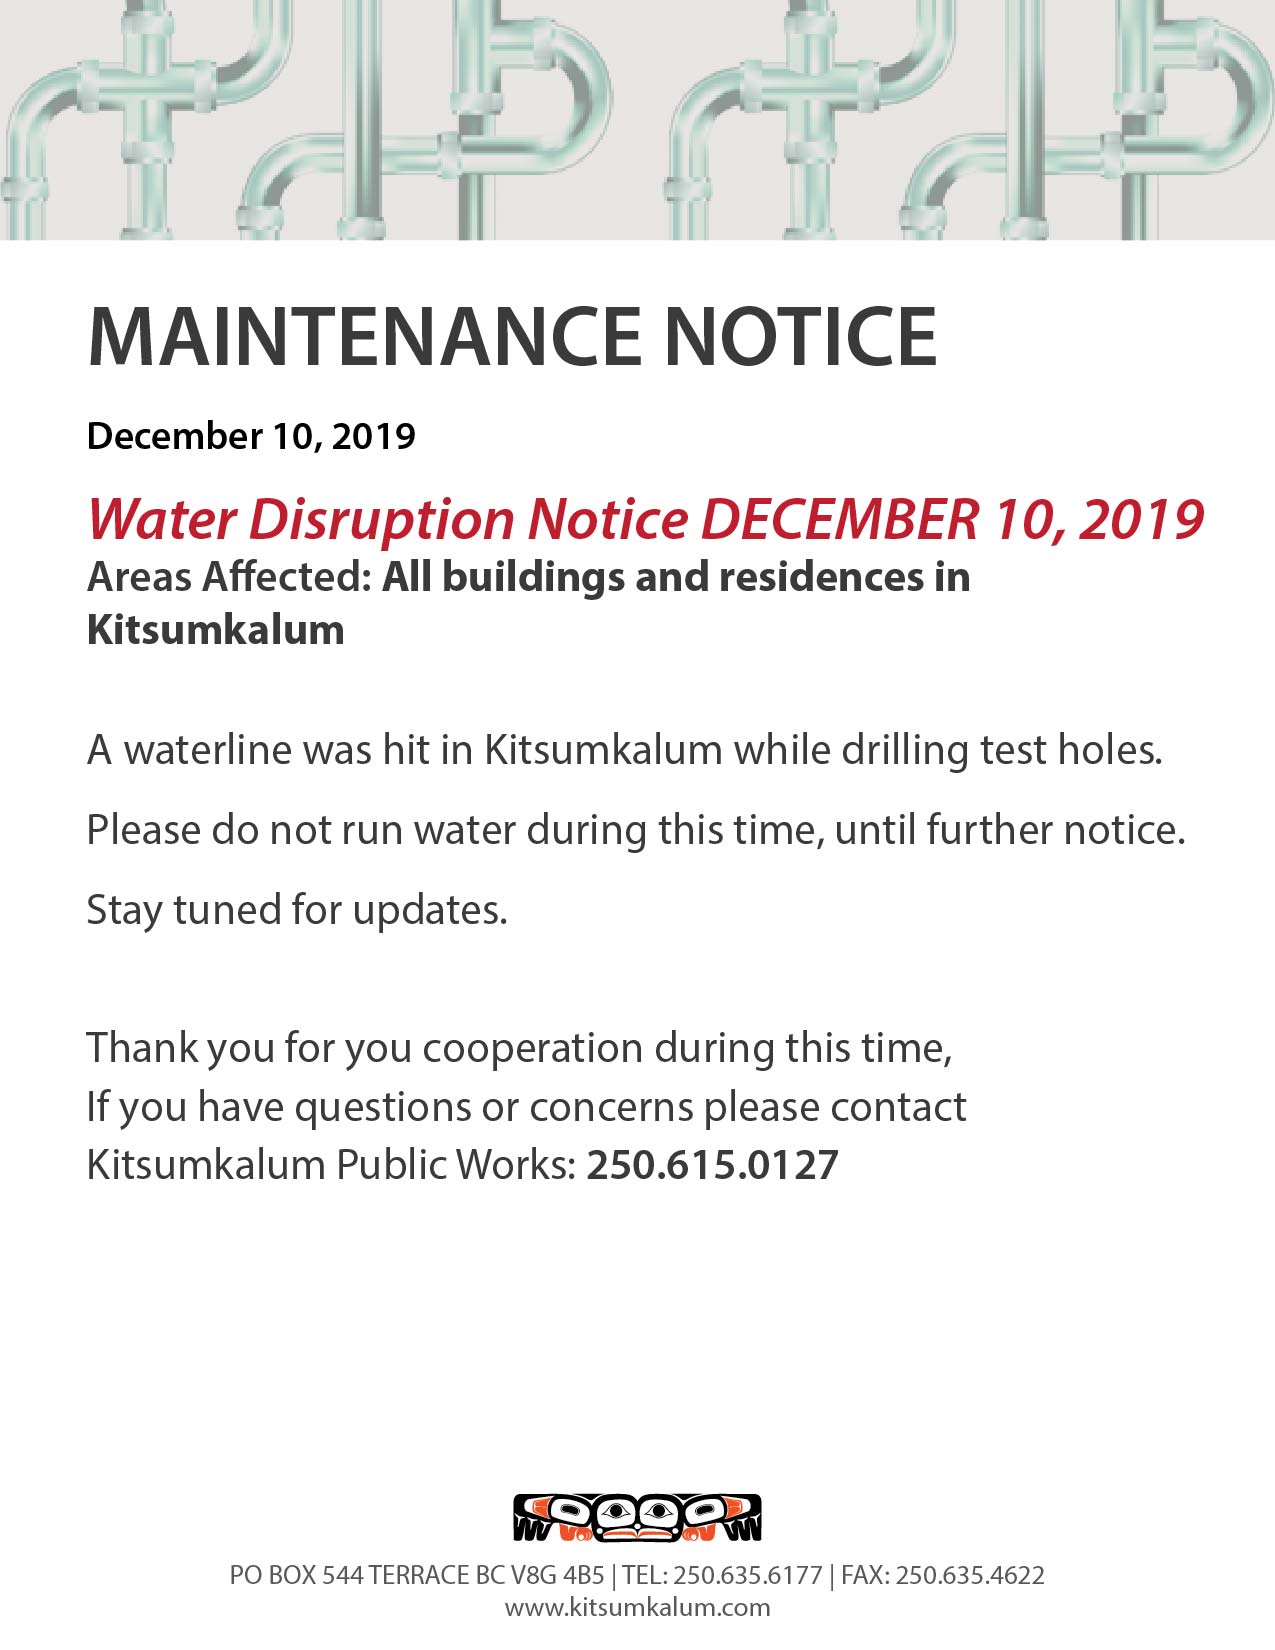 Water disruption today affected area